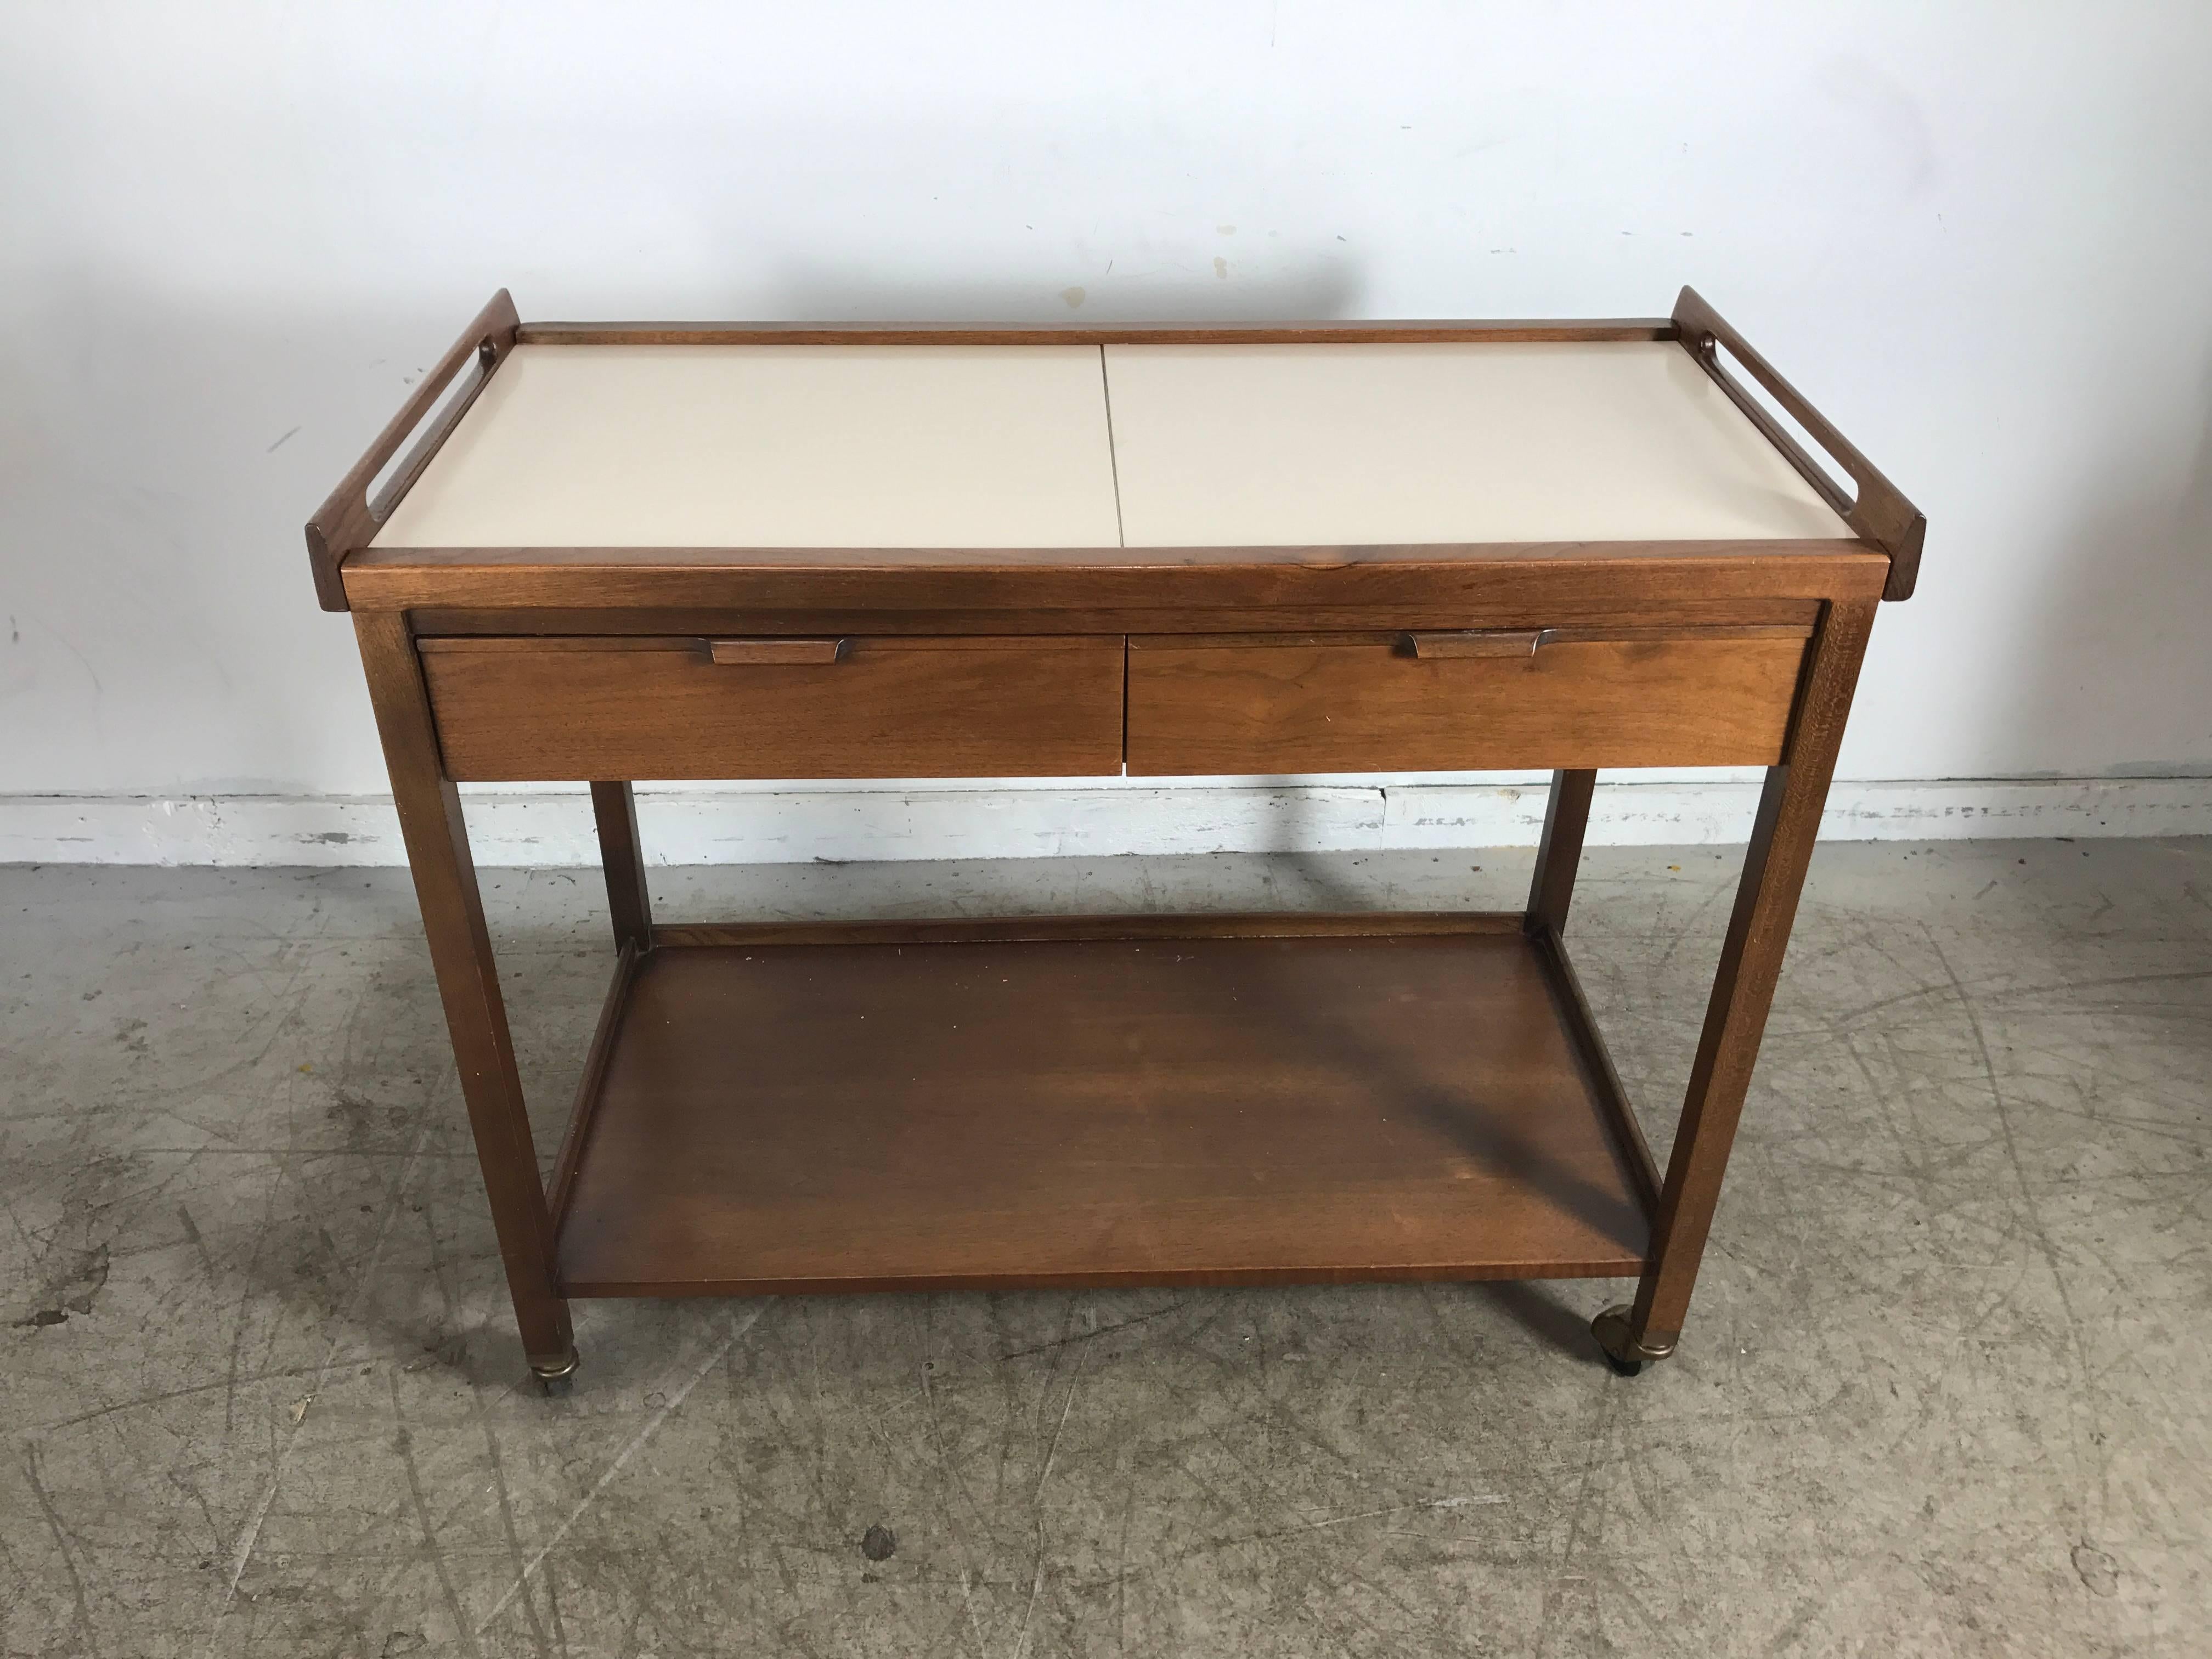 Classic Mid-Century Modern walnut expandable rolling bar cart or server, Manufactured by American of Martinsville, designed by Merton L. Gershun. Expanding white laminate sliding top opens to 56 inches, two drawers. Solid walnut construction, fit